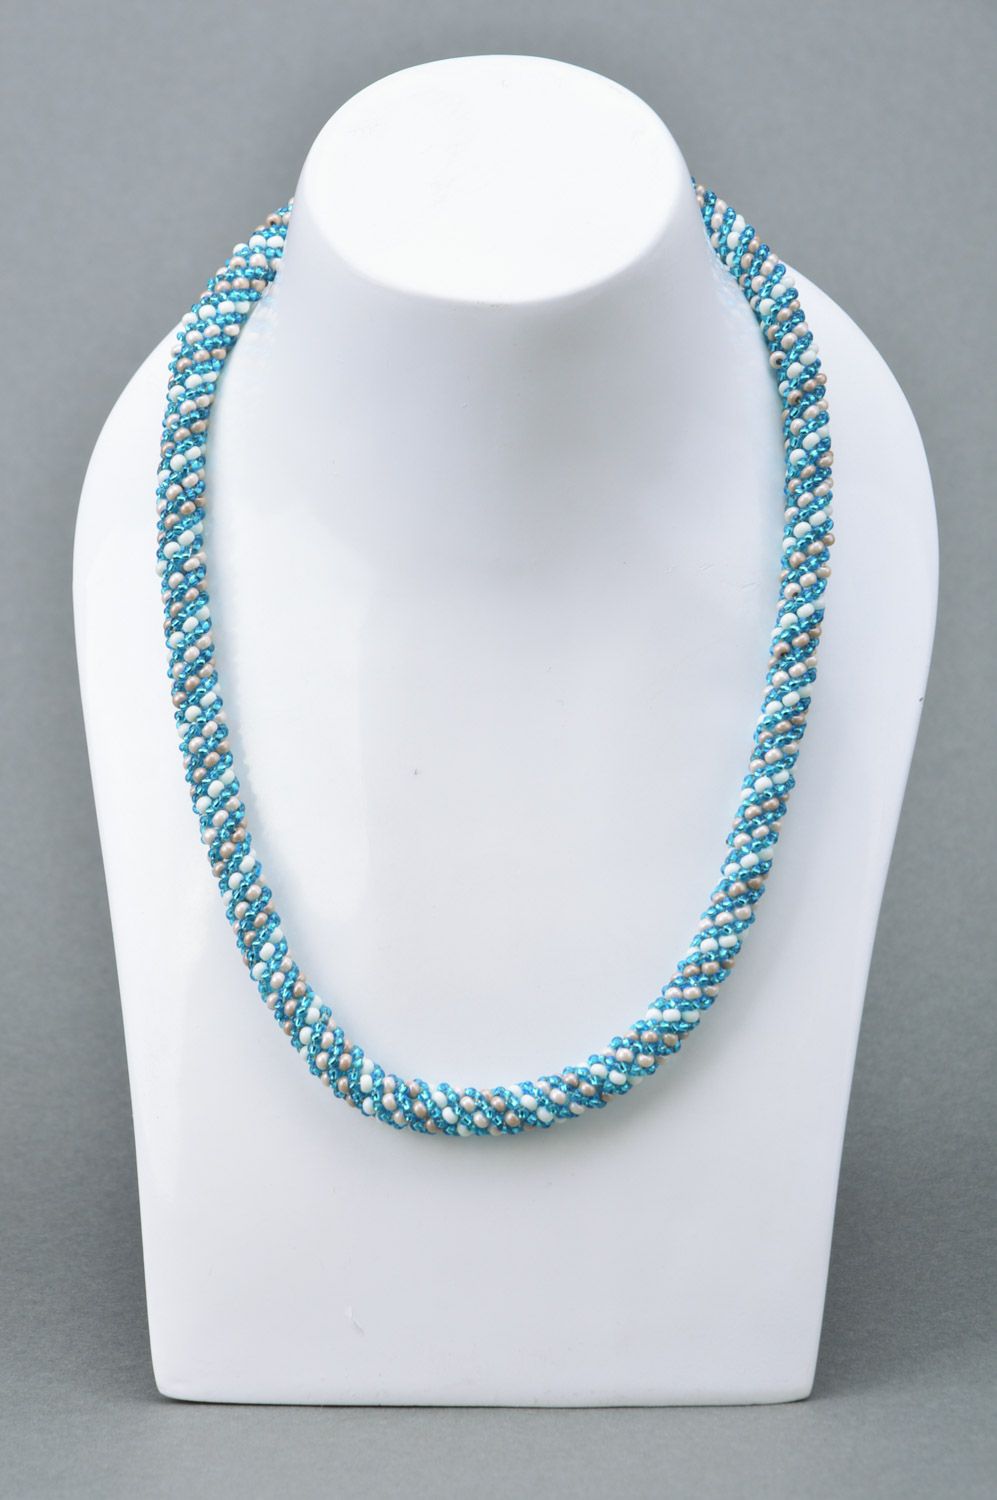 Handmade tender beaded cord necklace in blue and white colors for women photo 3